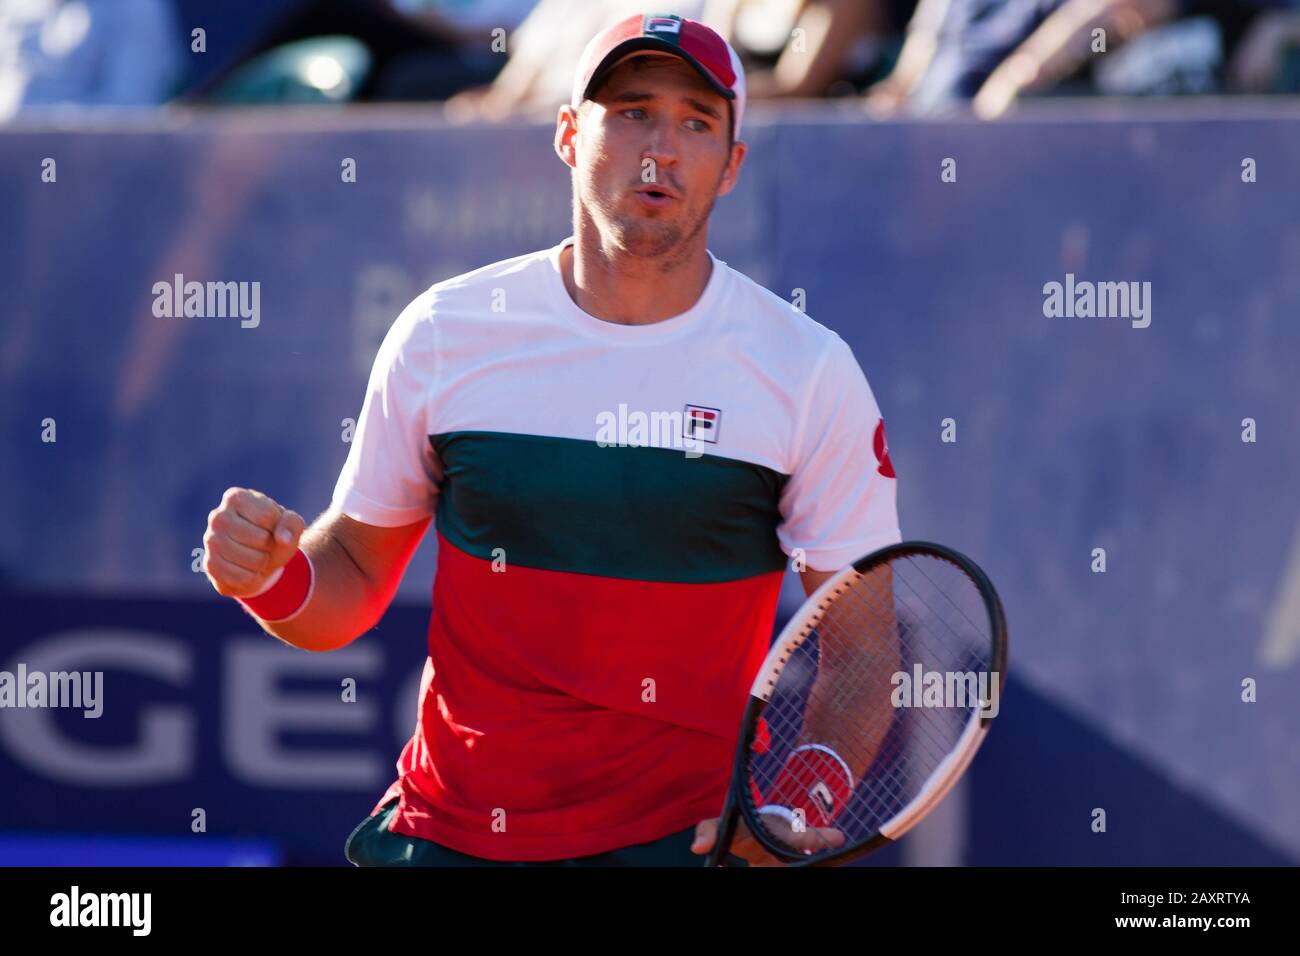 Page 2 - Dusan Lajovic High Resolution Stock Photography and Images - Alamy